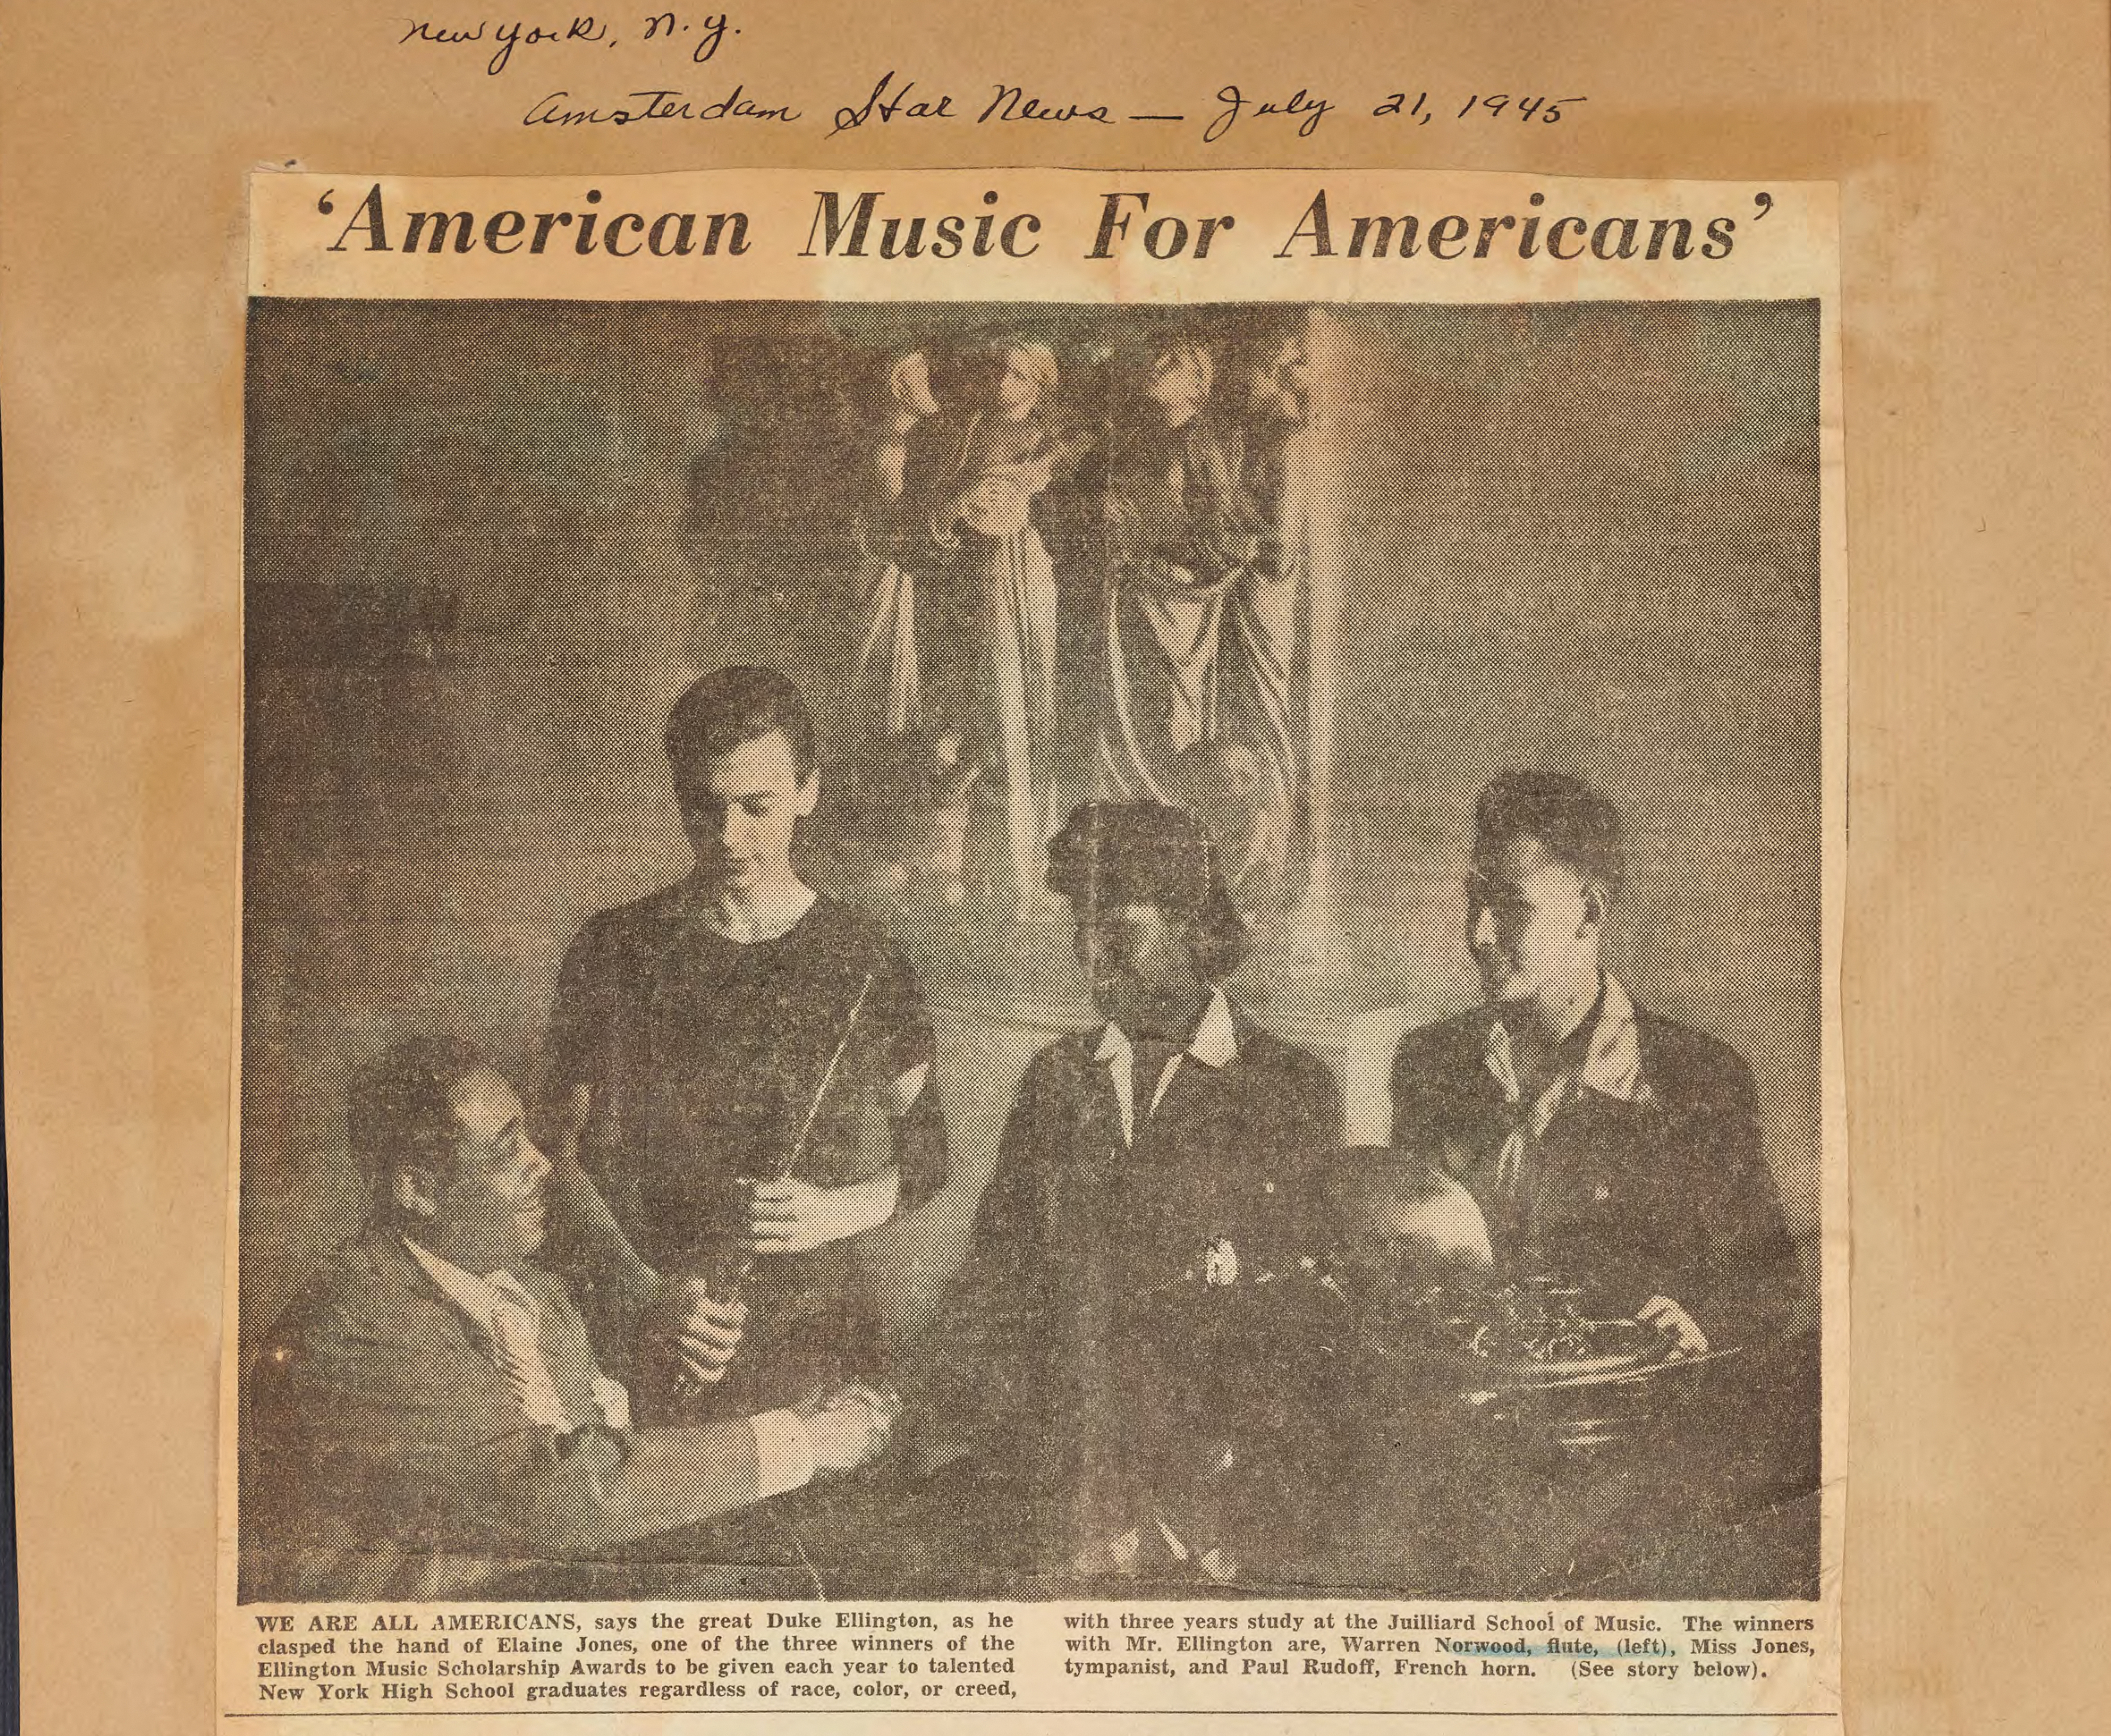 Yellowed scrapbook newspaper clipping that reads "Ellington Scholarship Winners Named as Duke Sets Another 'First' In Music"